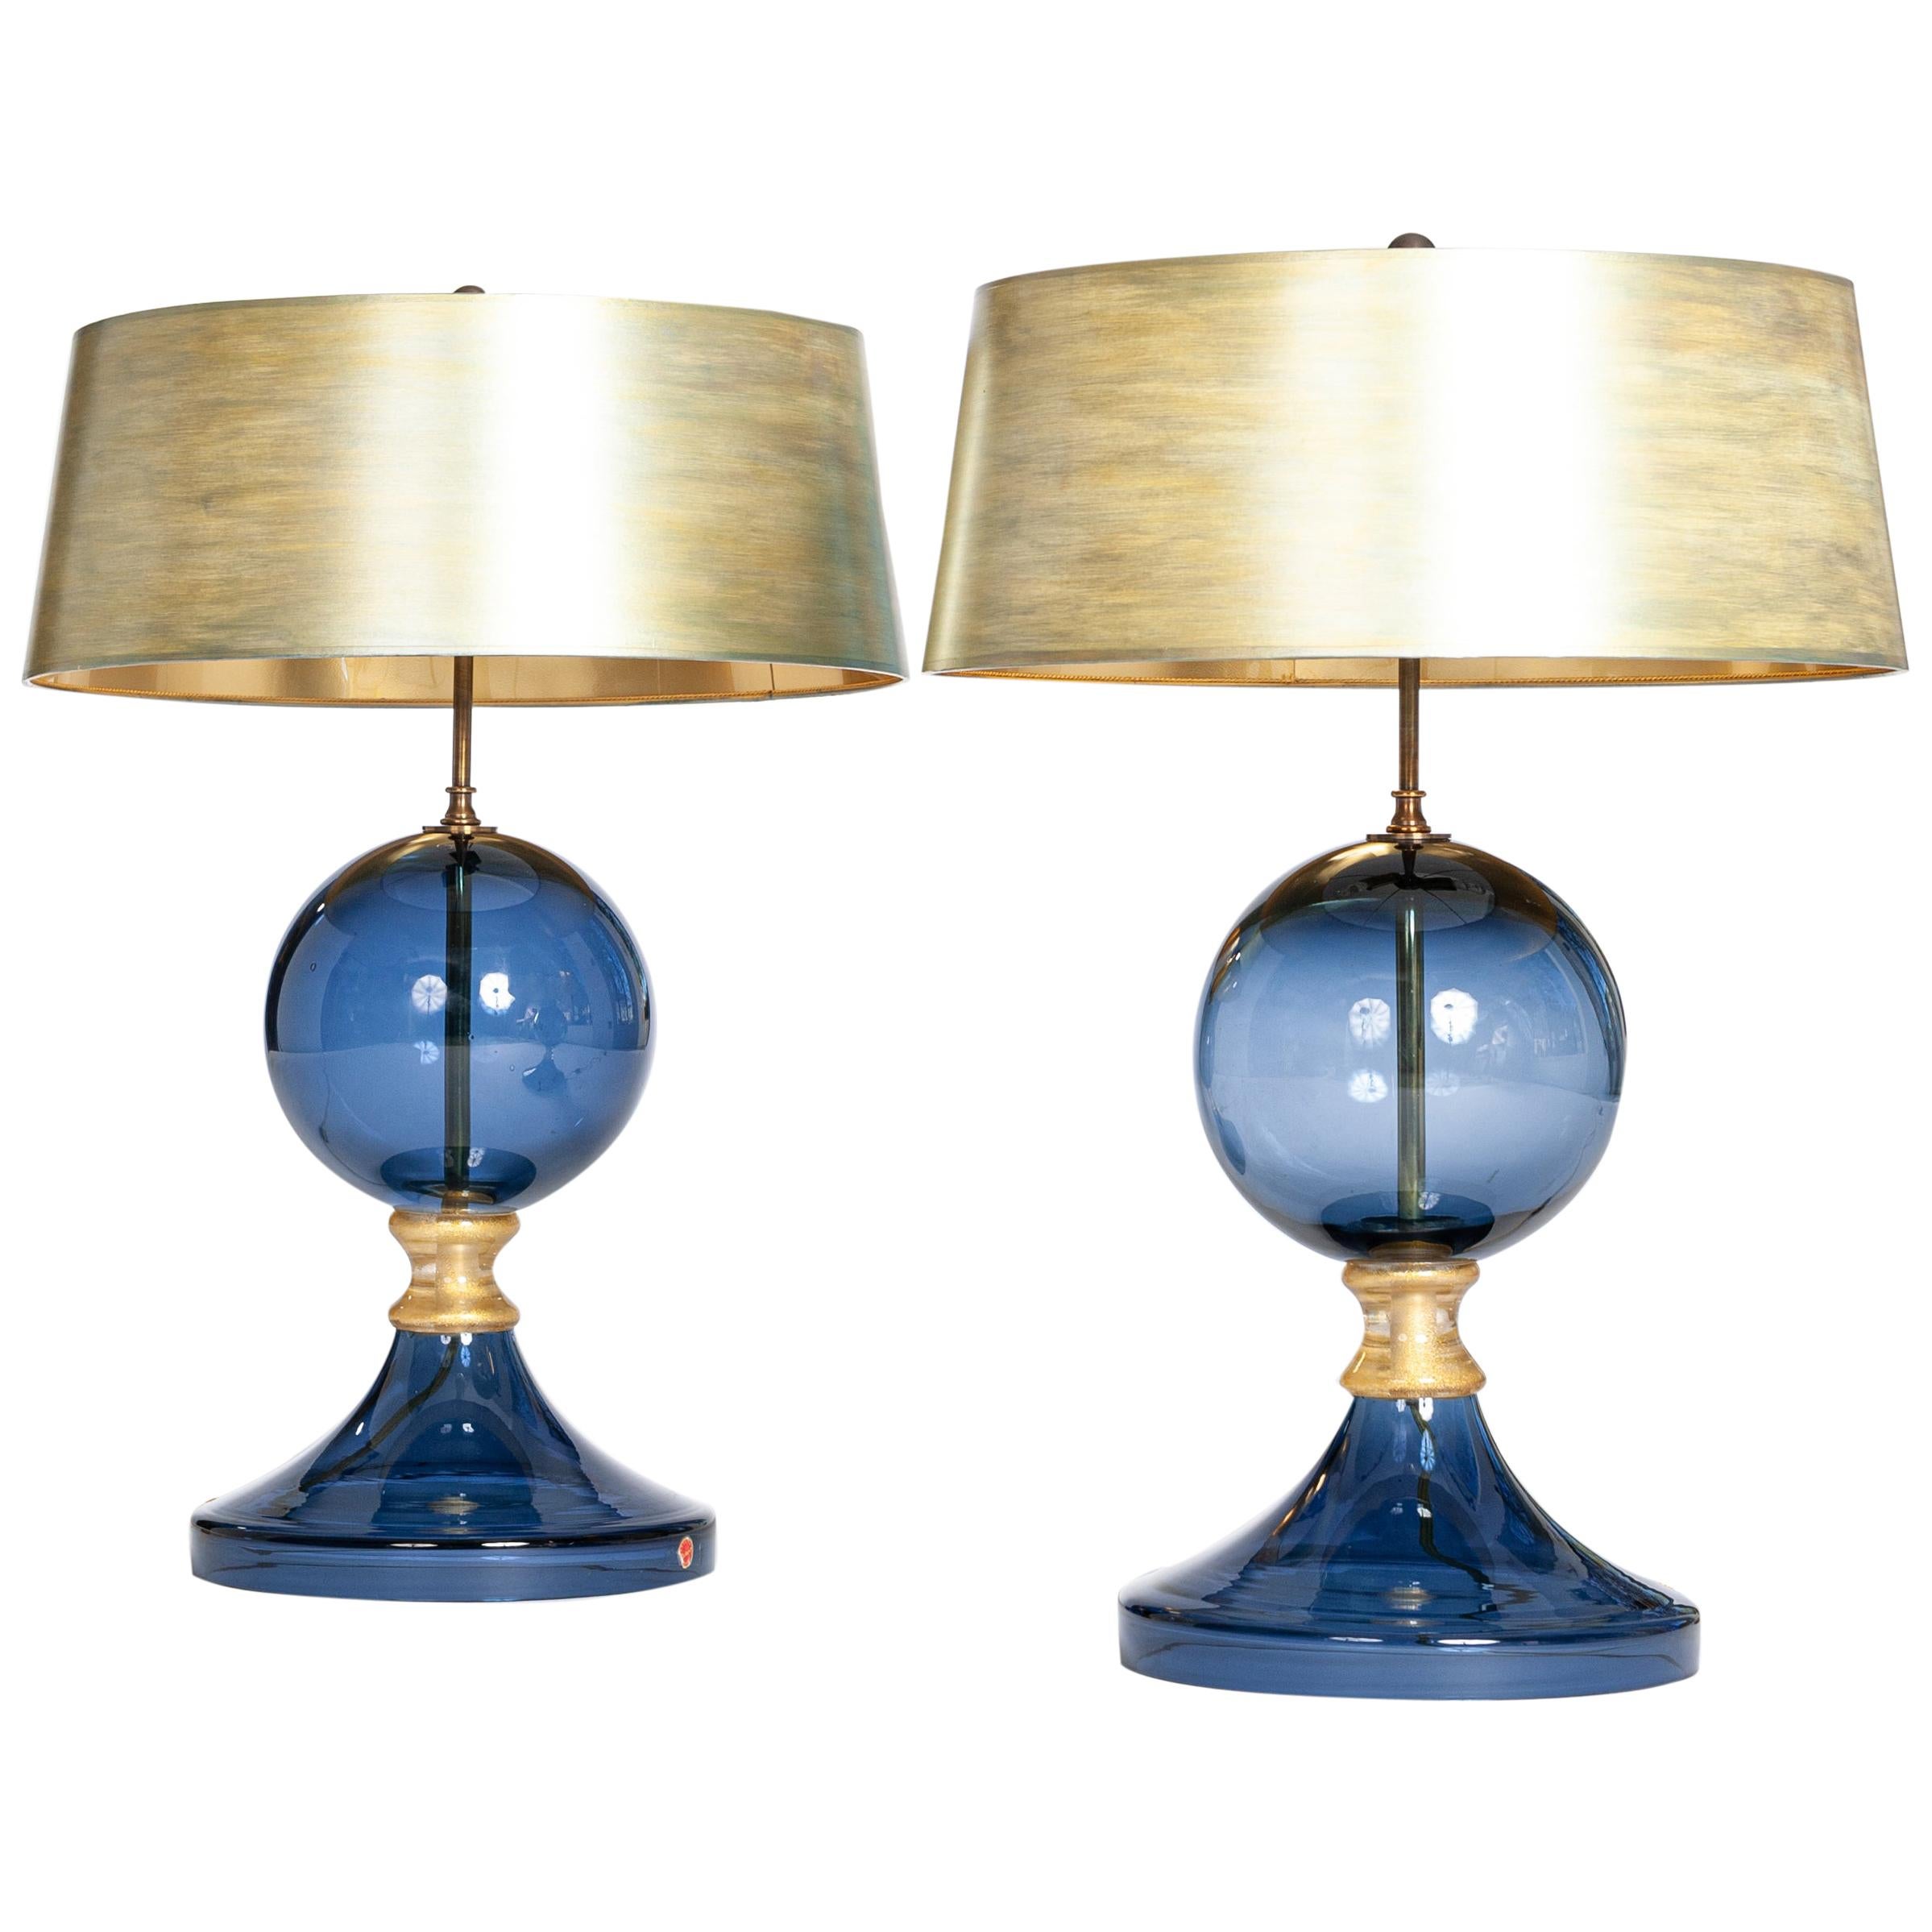 Pair of Italian Mid-Century Murano Glass Table Lamps Blue-Gold Colored